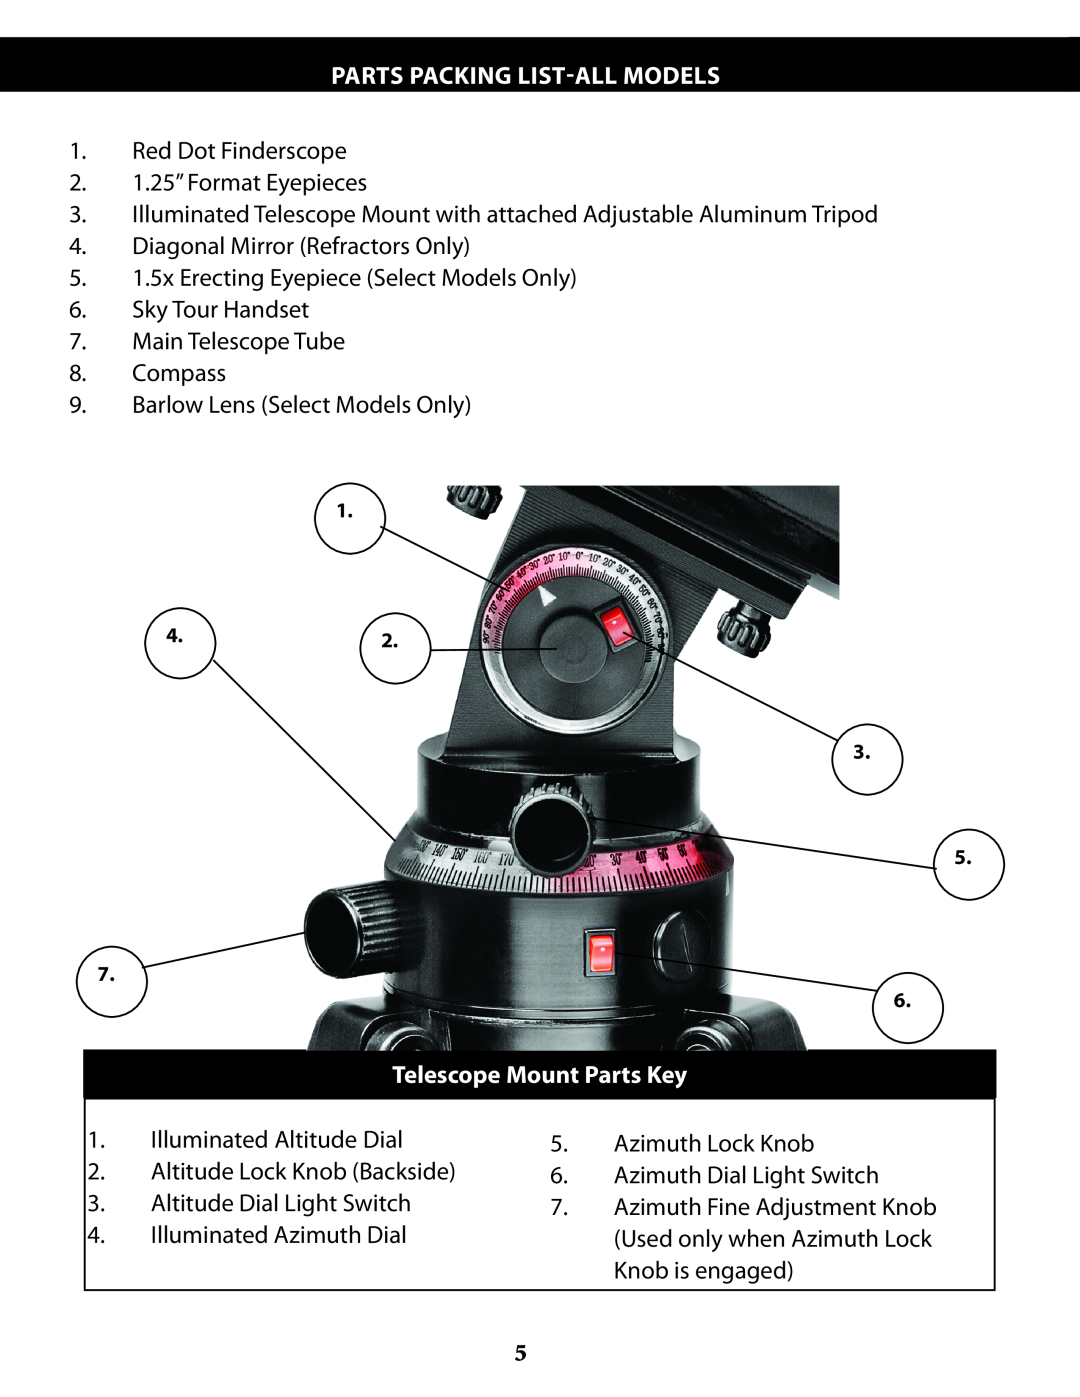 Bushnell 789961, 789971, 789946, 789931 instruction manual Parts packing list-all models, Telescope Mount Parts Key 